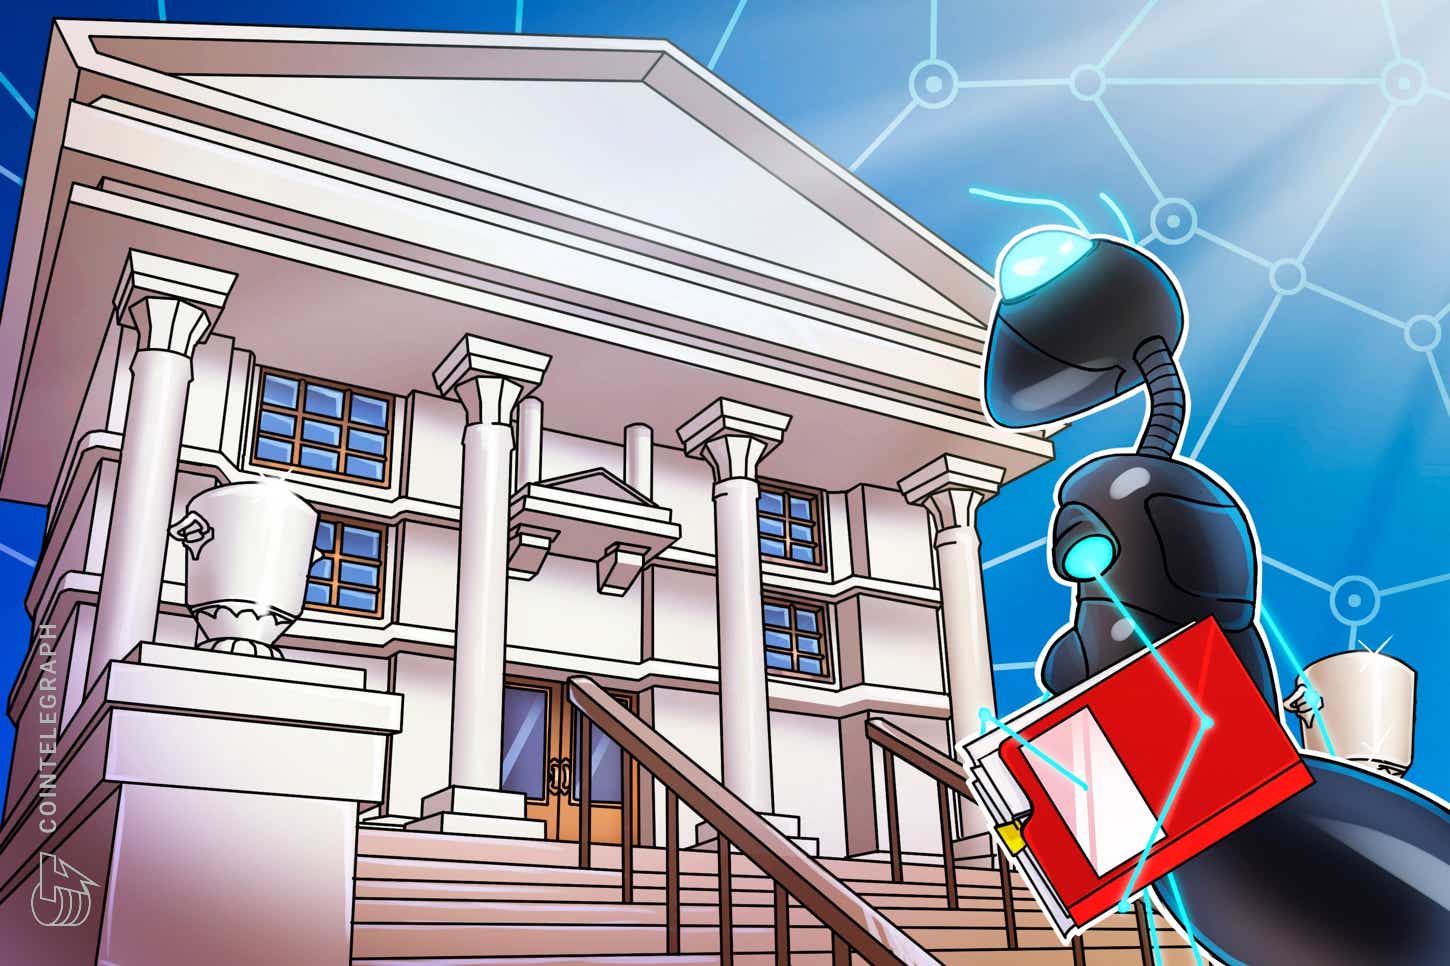 US Treasury report says stablecoin legislation is ‘urgently needed’ to address risks